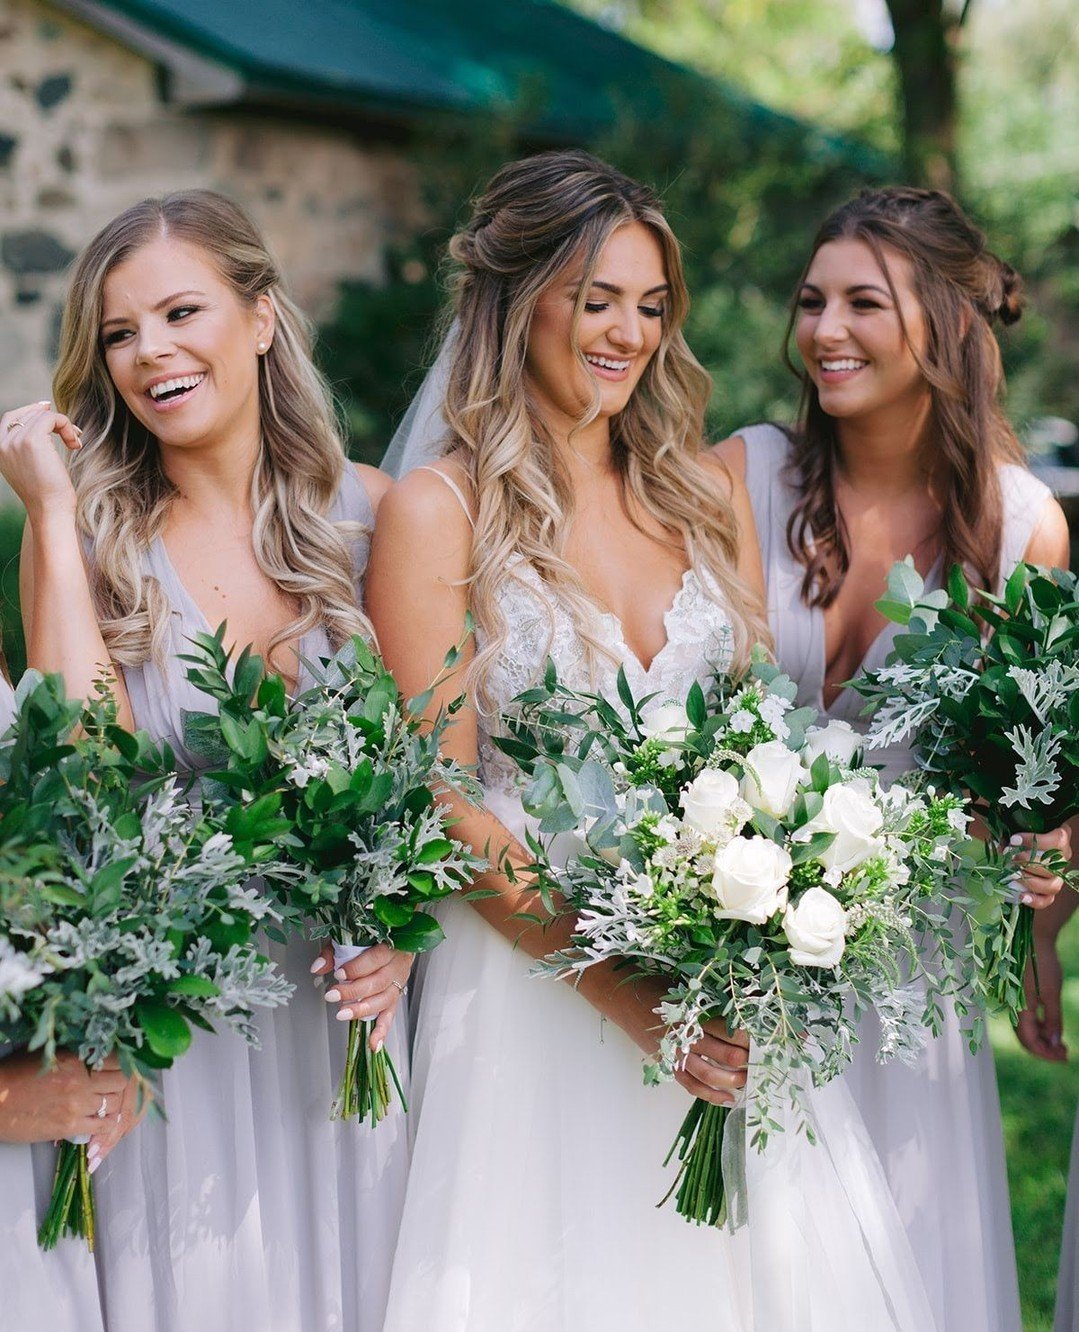 Pro wedding tip: cohesive doesn't mean identical, and that means you don't have to share the same floral for your bridal bouquet with your bridesmaids bouquets!⁠
⁠
For this wedding, we opted for touches of white in the form of beautiful white roses f